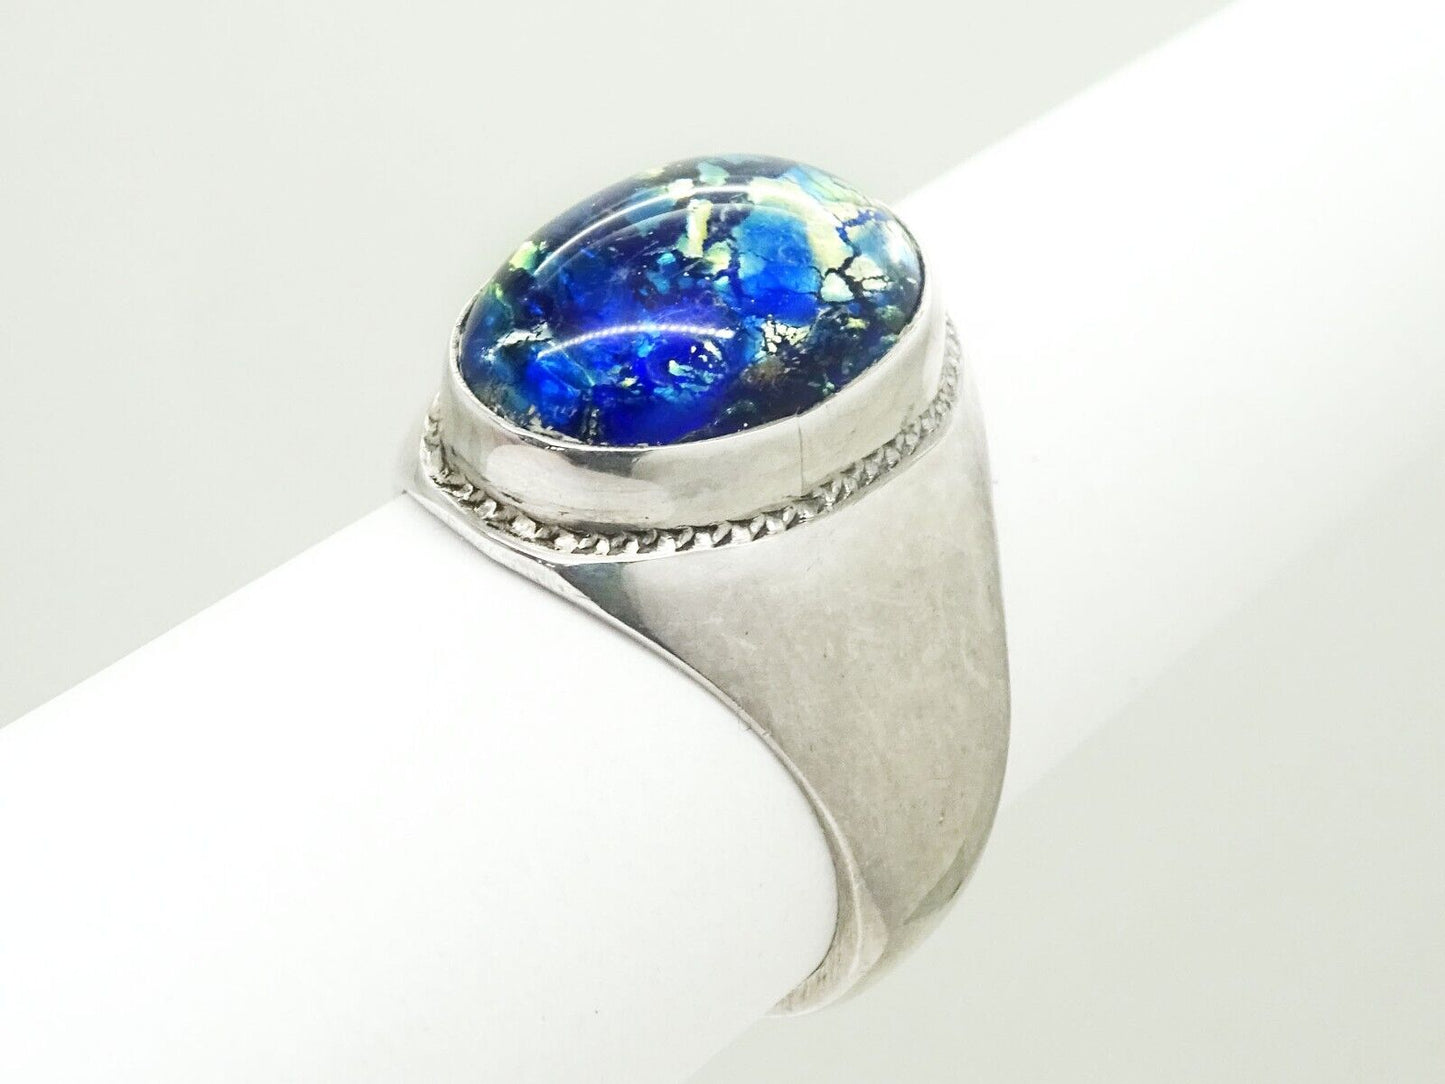 Vintage Mexico Dichroic Glass Cabochon Ring Sterling Silver Size 12.75